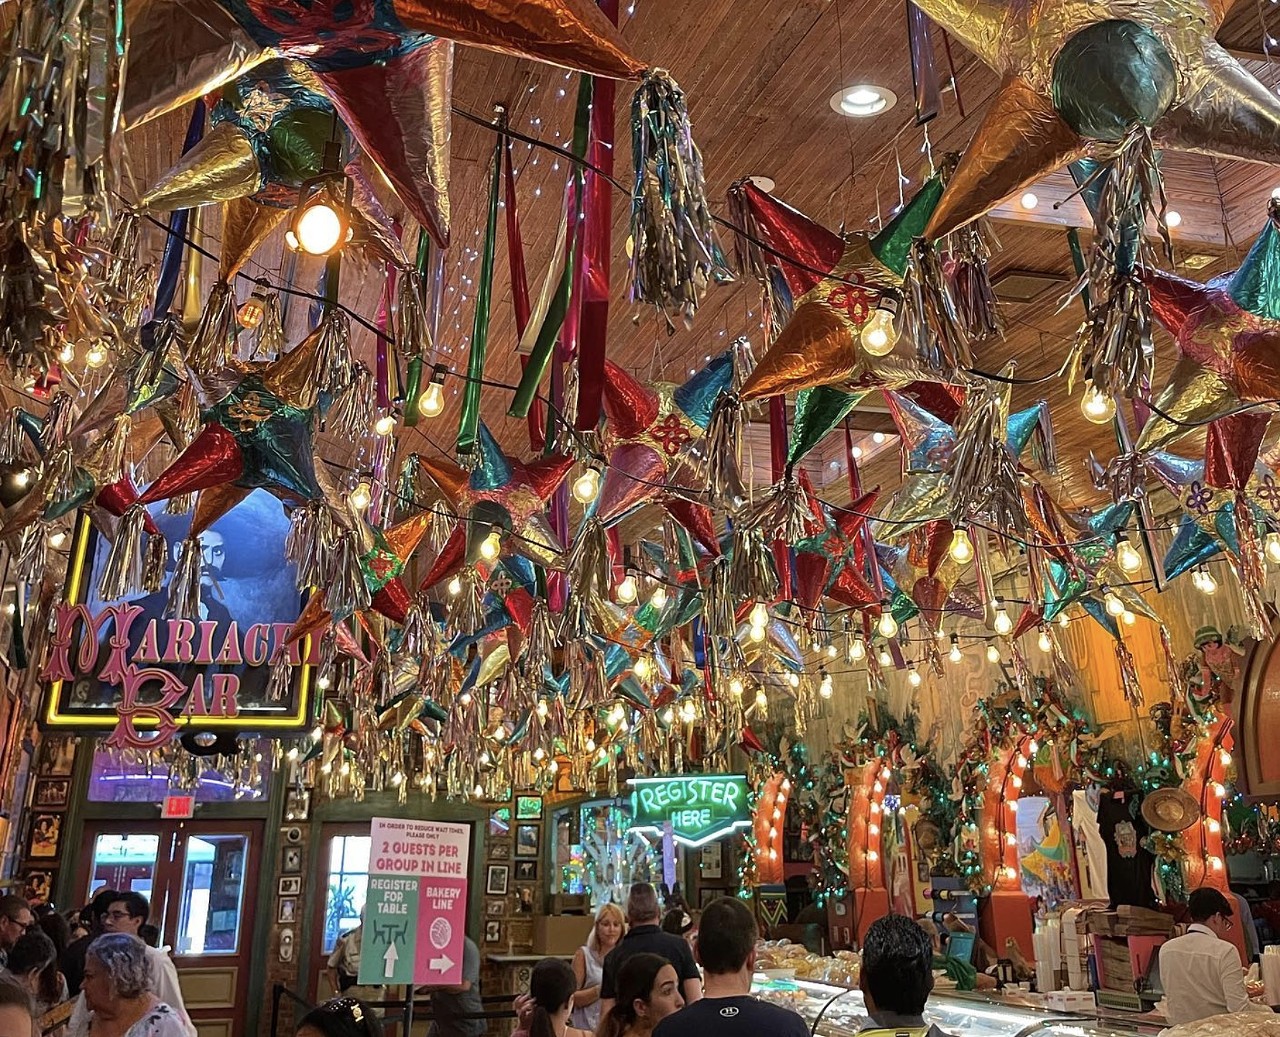 Mi Tierra
218 Produce Row, (210) 225-1262,mitierracafe.com
Many a selfie has been taken in front of Mi Tierra’s glittering estrellas and larger-than-life murals, creating nearly a rite of passage for locals and visitors alike. While you’re at it, wander out front and snap one with about a million papel picado fluttering in the background.
Photo via Instagram / cp2_unique_designs